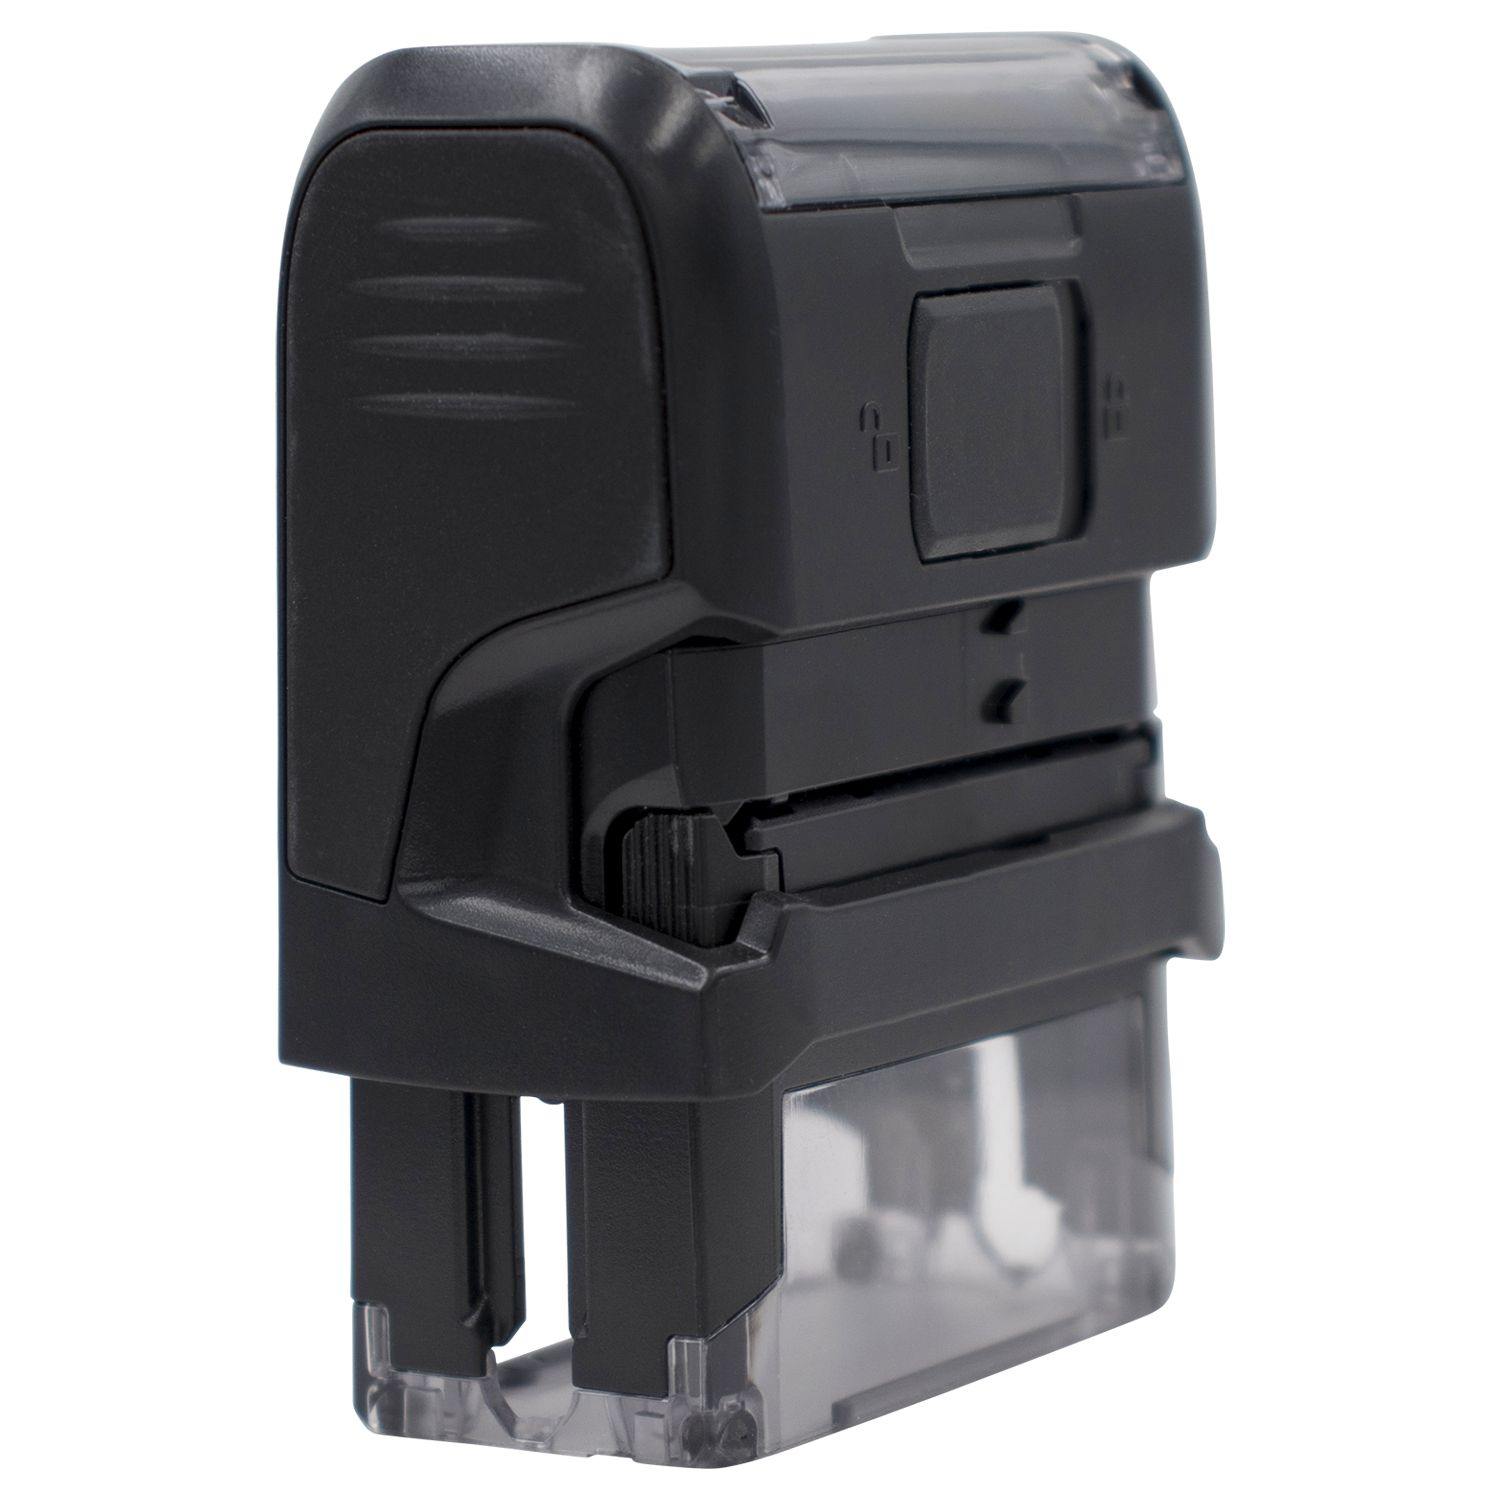 Self Inking Workers Comp Stamp - Engineer Seal Stamps - Brand_Trodat, Impression Size_Small, Stamp Type_Self-Inking Stamp, Type of Use_Finance